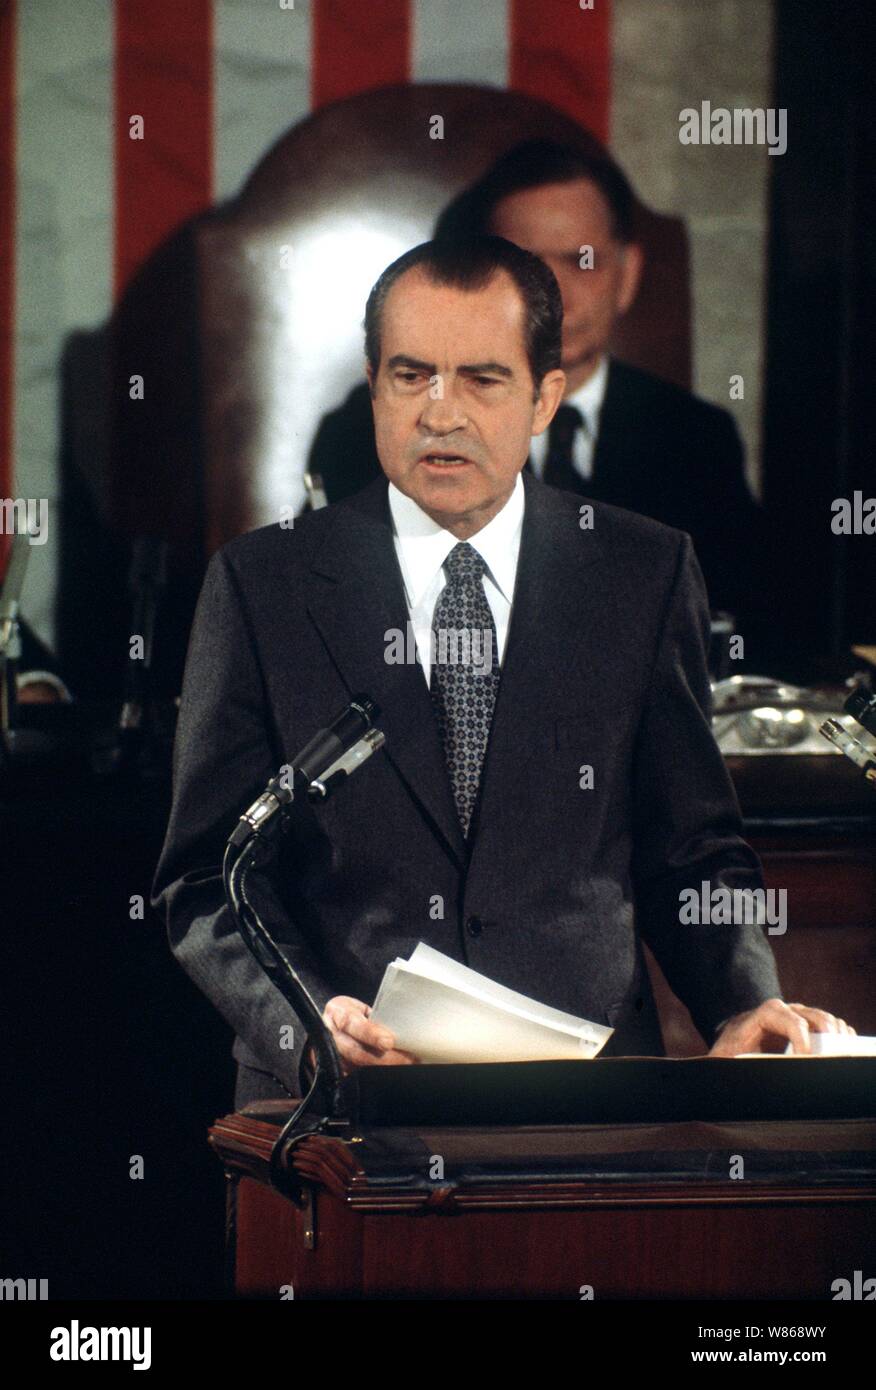 Washington, USA. 30th Nov, 2002. American President Richard Nixon giving a speech to both Houses of Parliament at the US Congress in Washington. (Undated recording). Nixon, who was sworn in 1969 as the 37th President of the United States, resigned in 1974 after the Watergate scandal in order to avoid impeachment proceedings. He was born on 9 1.1913 in Yorba Linda, California and died on 22.4.1994 in New York. | usage worldwide Credit: dpa/Alamy Live News Stock Photo